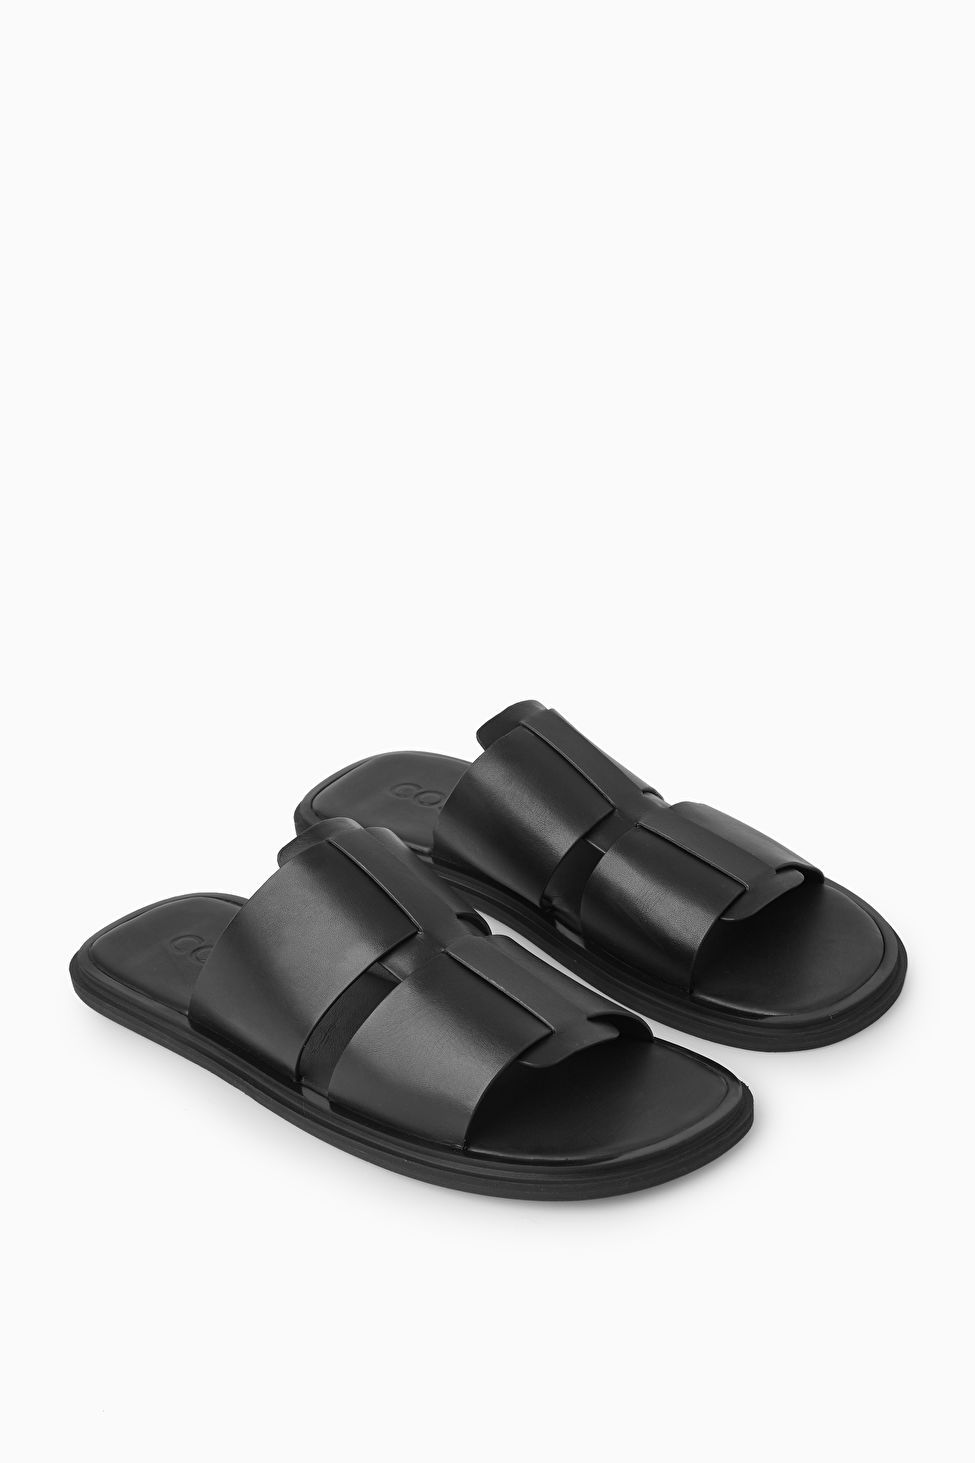 WOVEN LEATHER STRAP SANDALS - BLACK - COS | COS UK